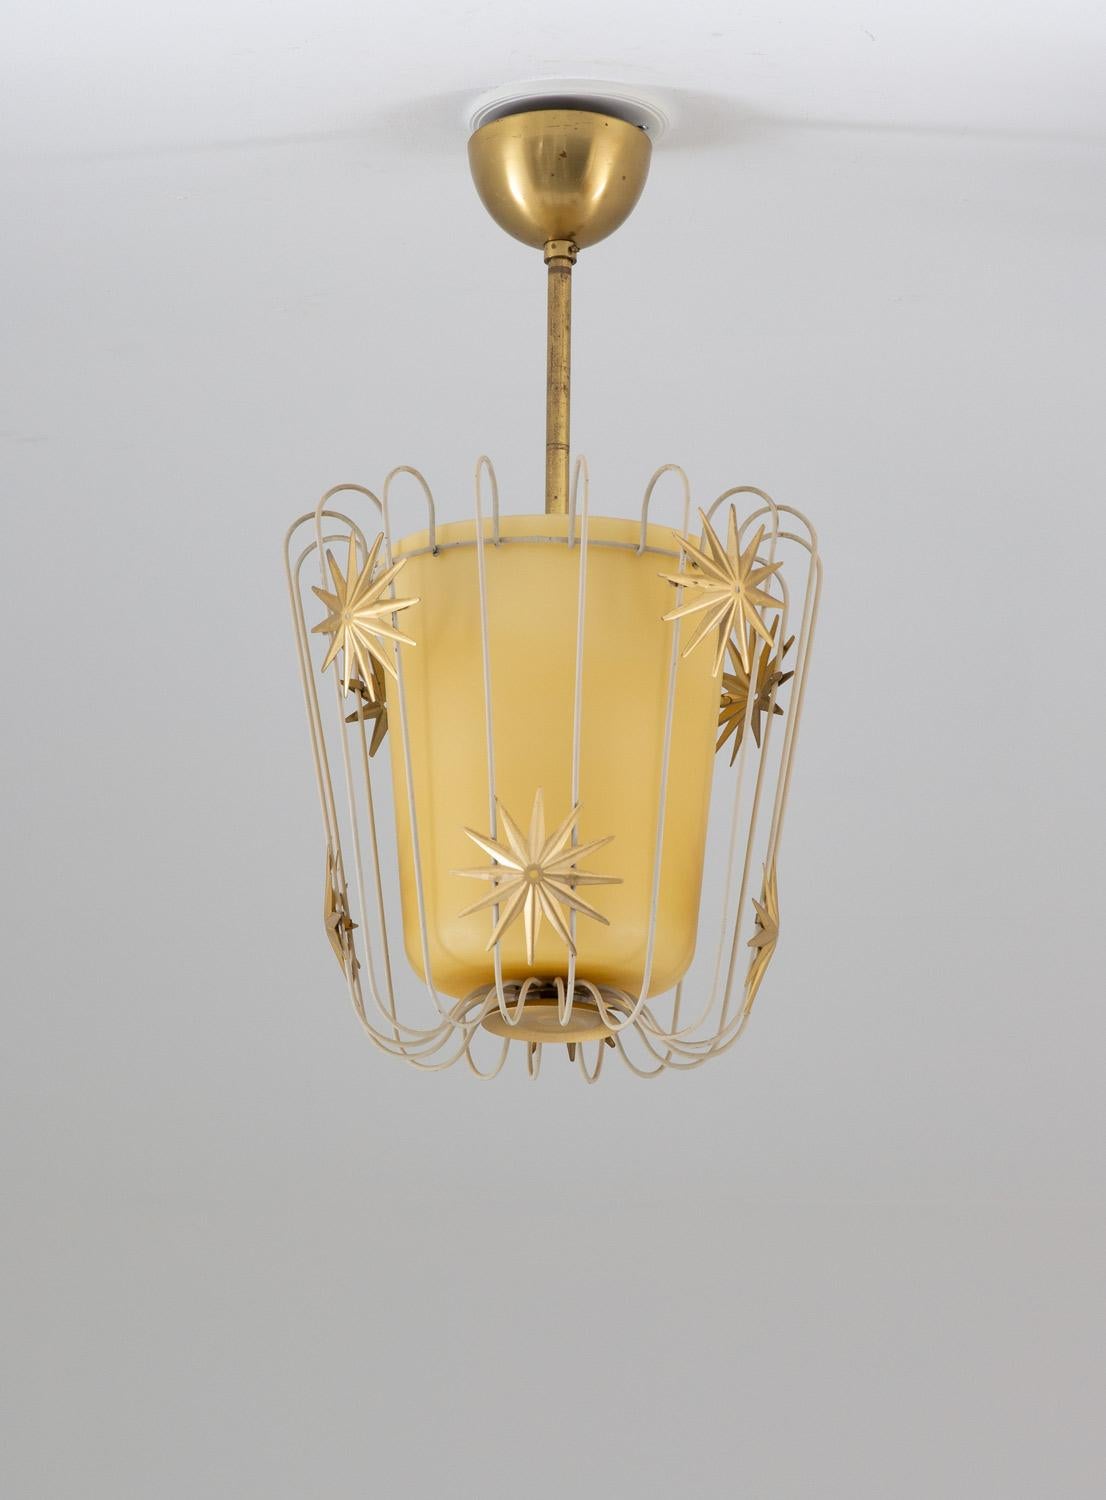 Elegant pendant in brass, metal and frosted glass produced in Sweden.
The lamp consist of a glass shade, surrounded by metal strings with star shaped ornaments.

Condition: Good original condition with patina.